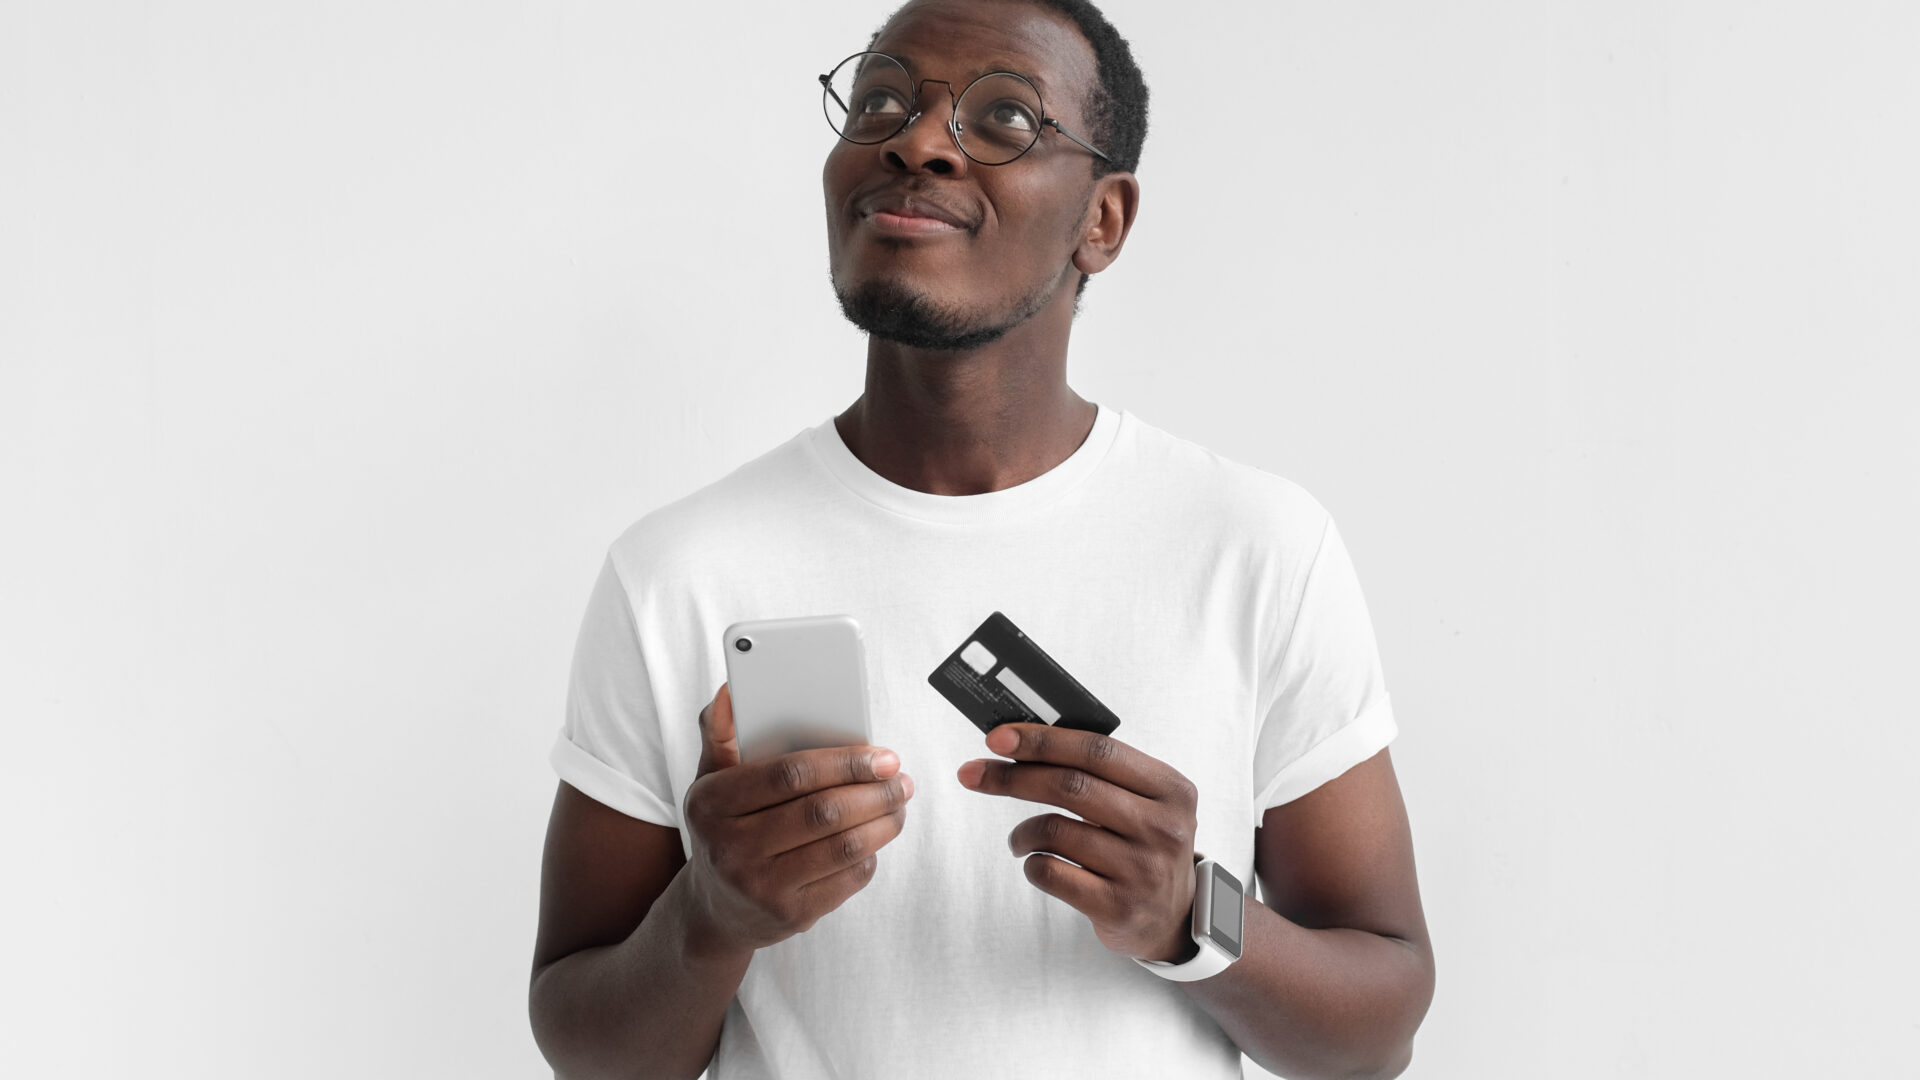 Gentleman holding a credit card and his phone.